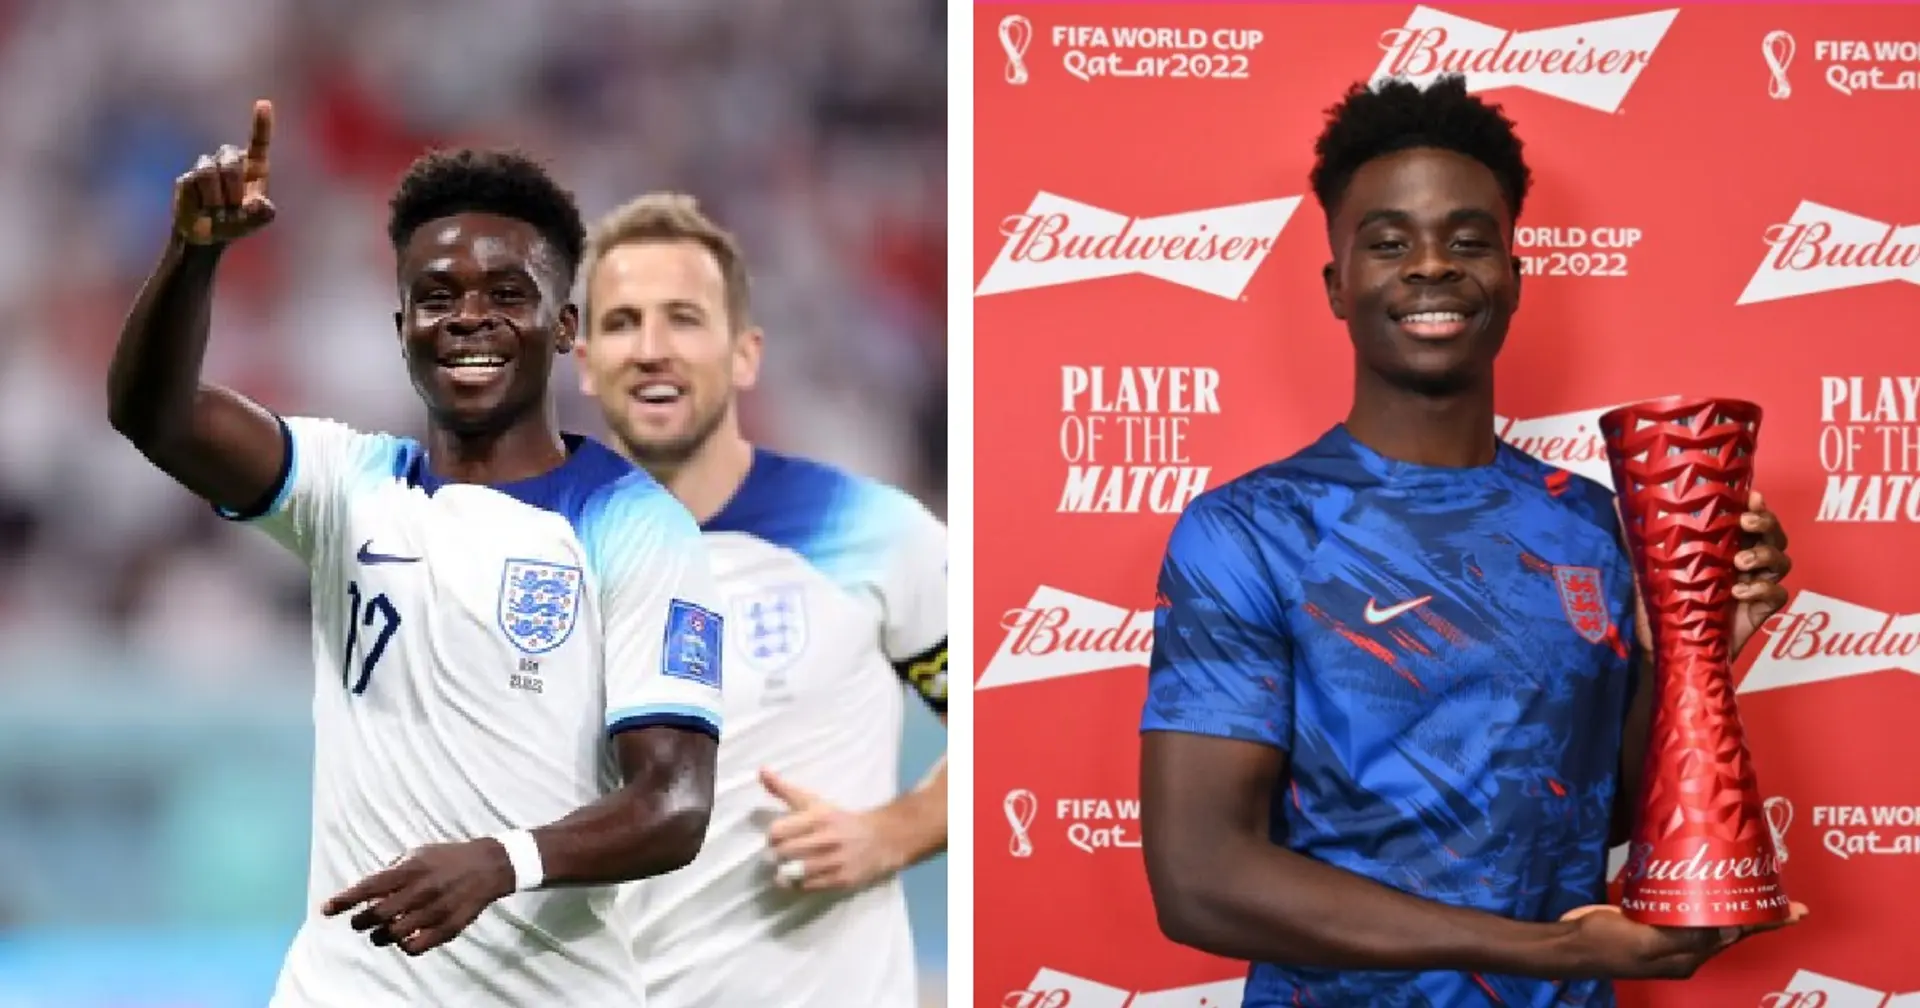 Saka makes history on World Cup debut & 2 more big Arsenal stories you might've missed